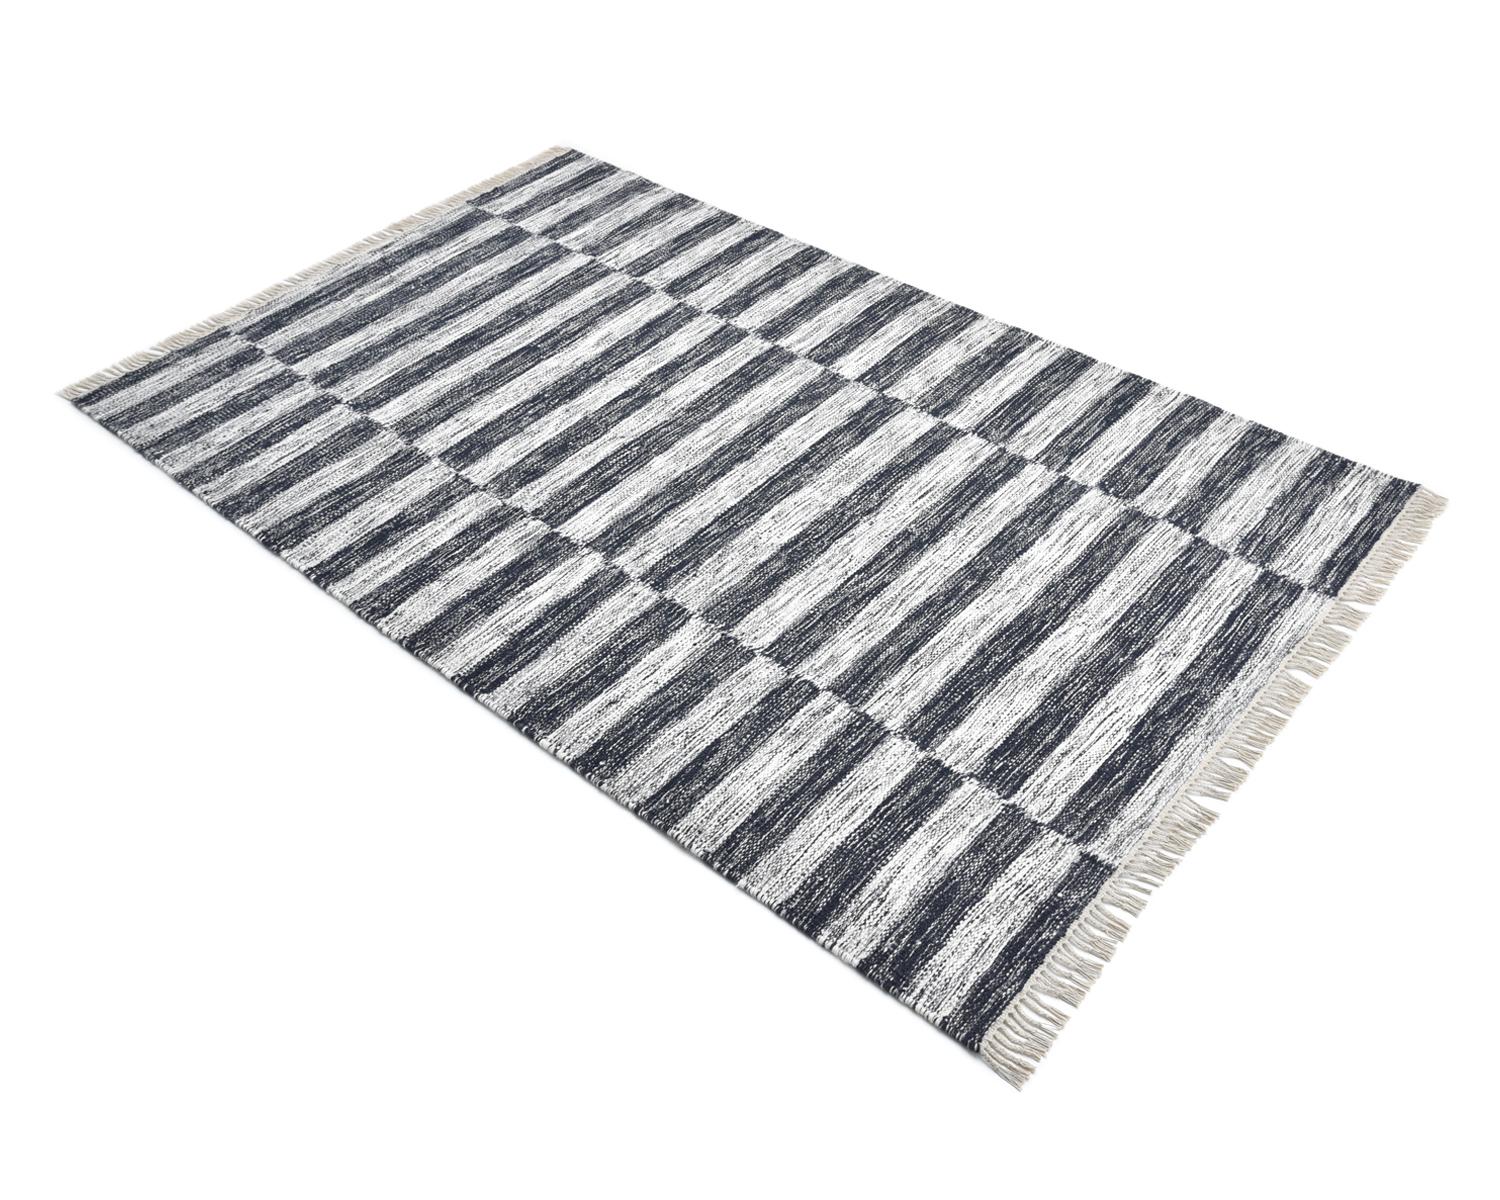 Solo Rugs Flatweave Striped Hand Woven Black Area Rug For Sale 1